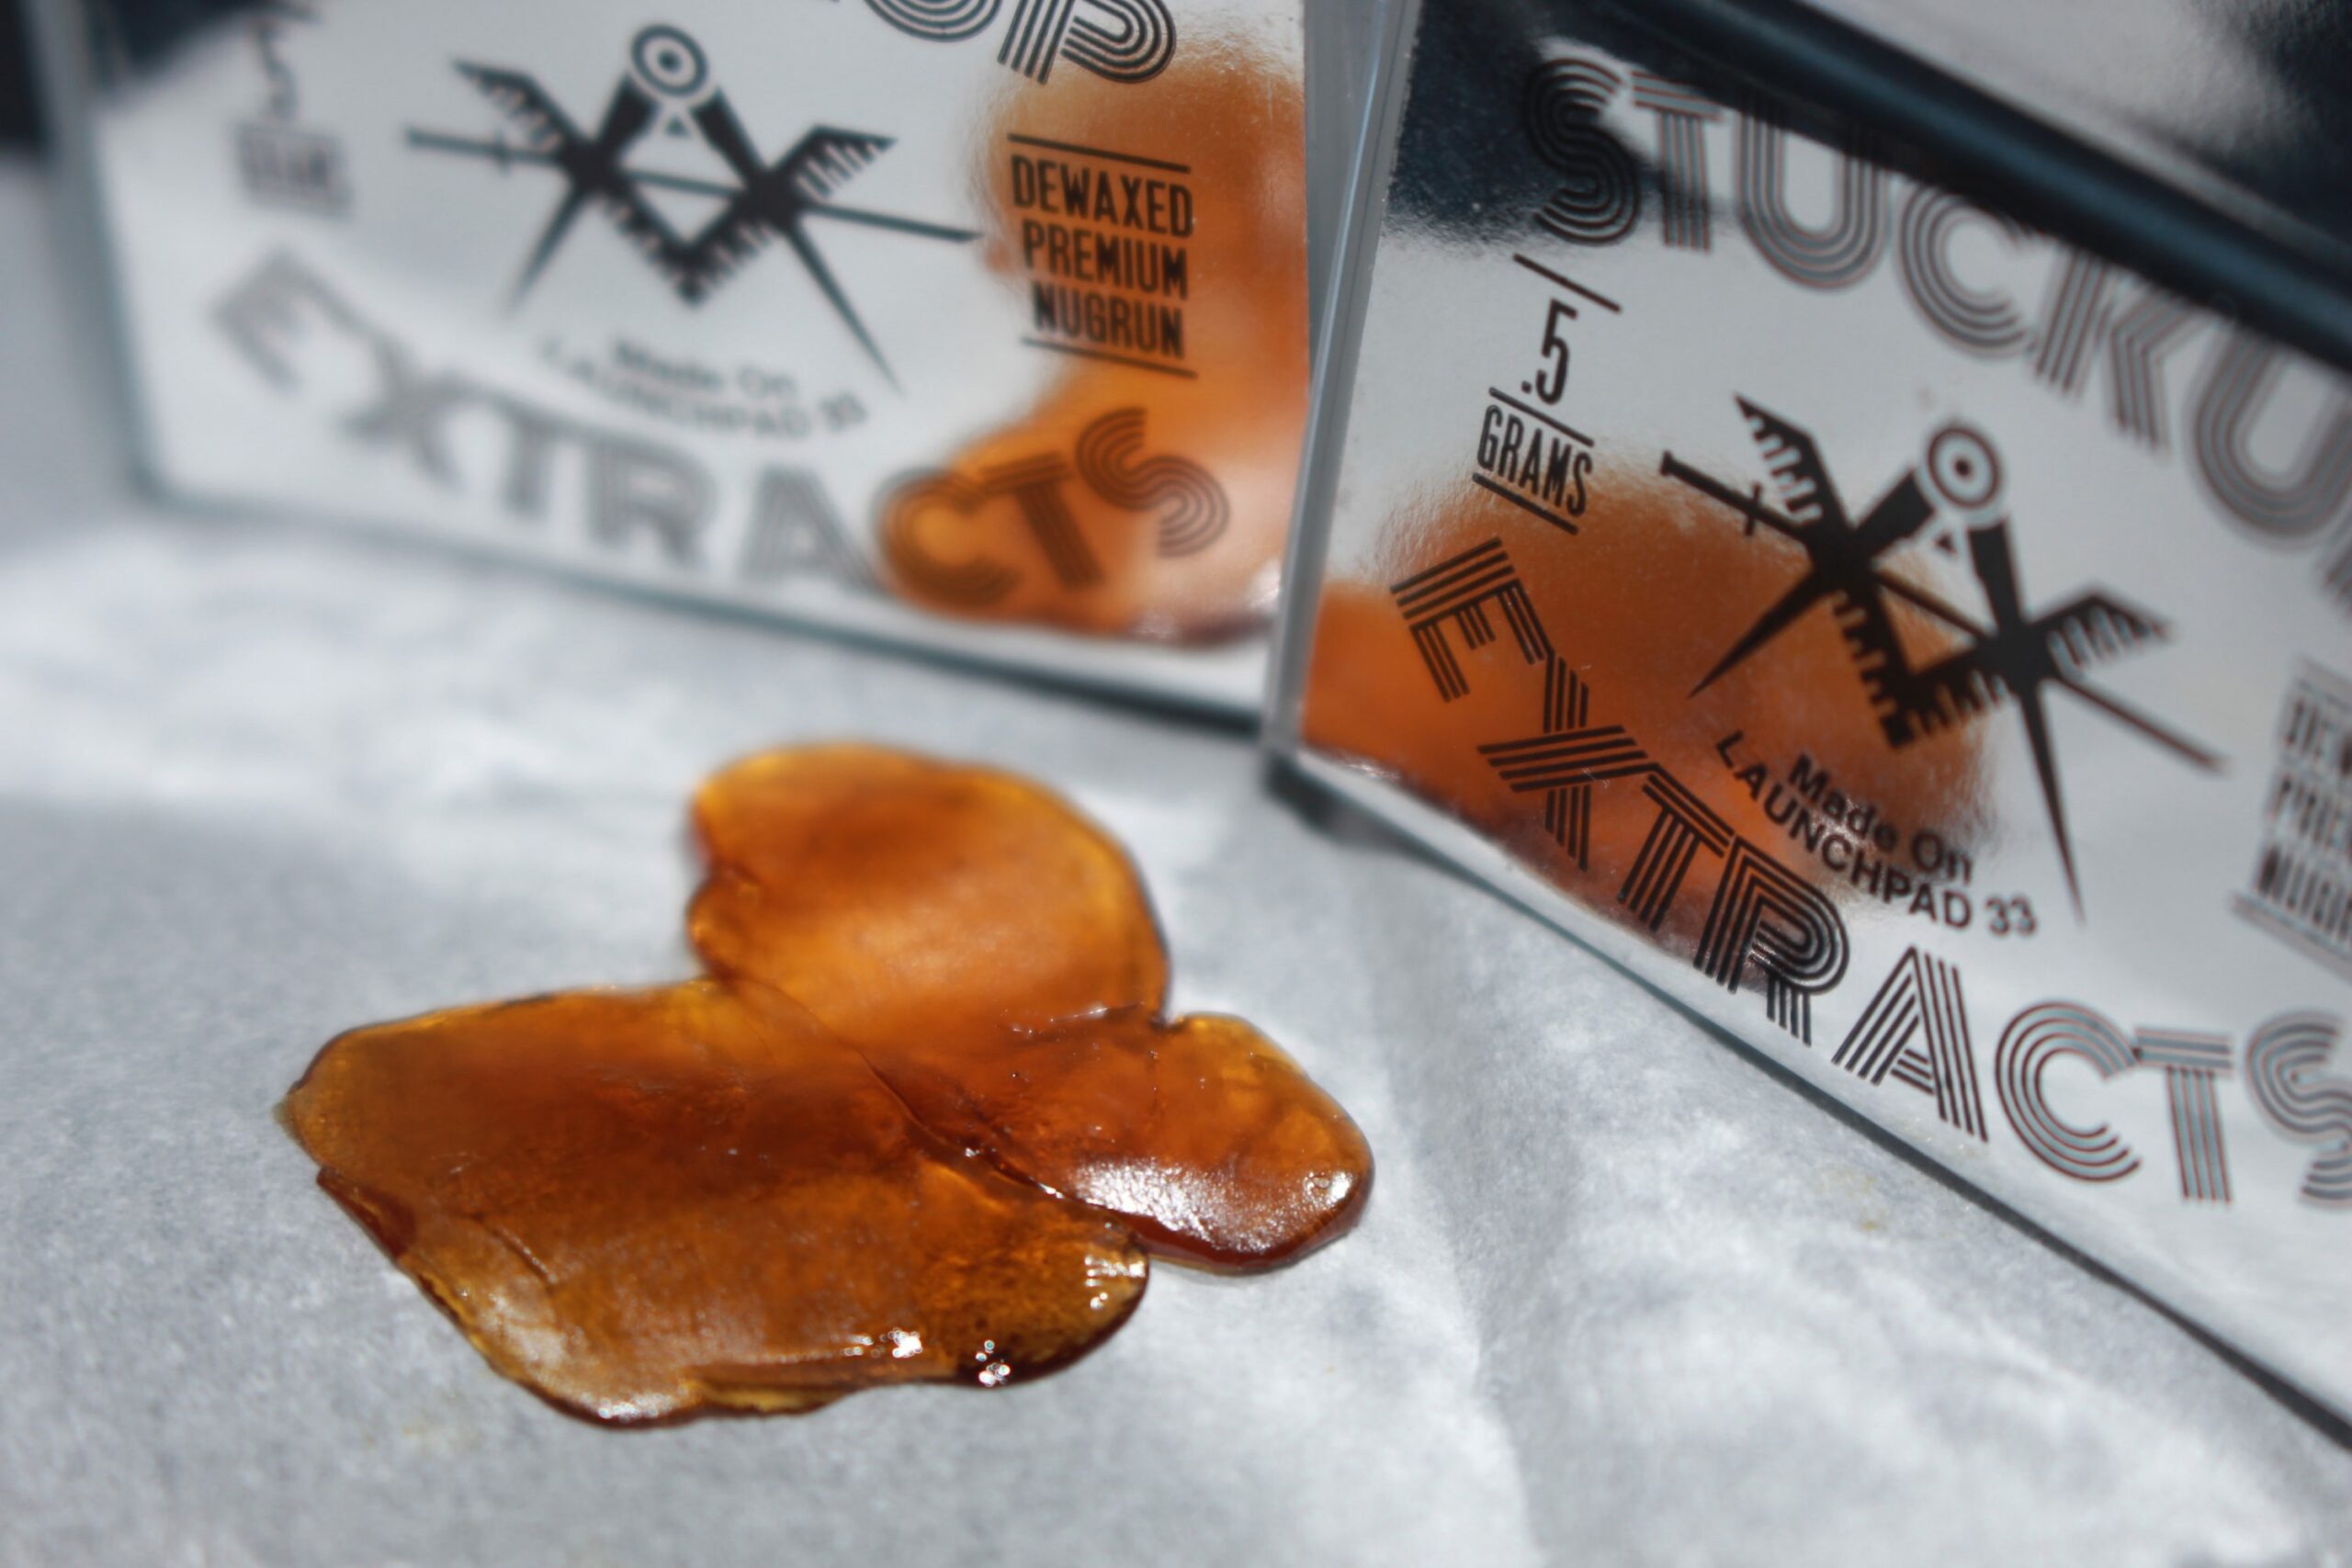 High quality concentrate.